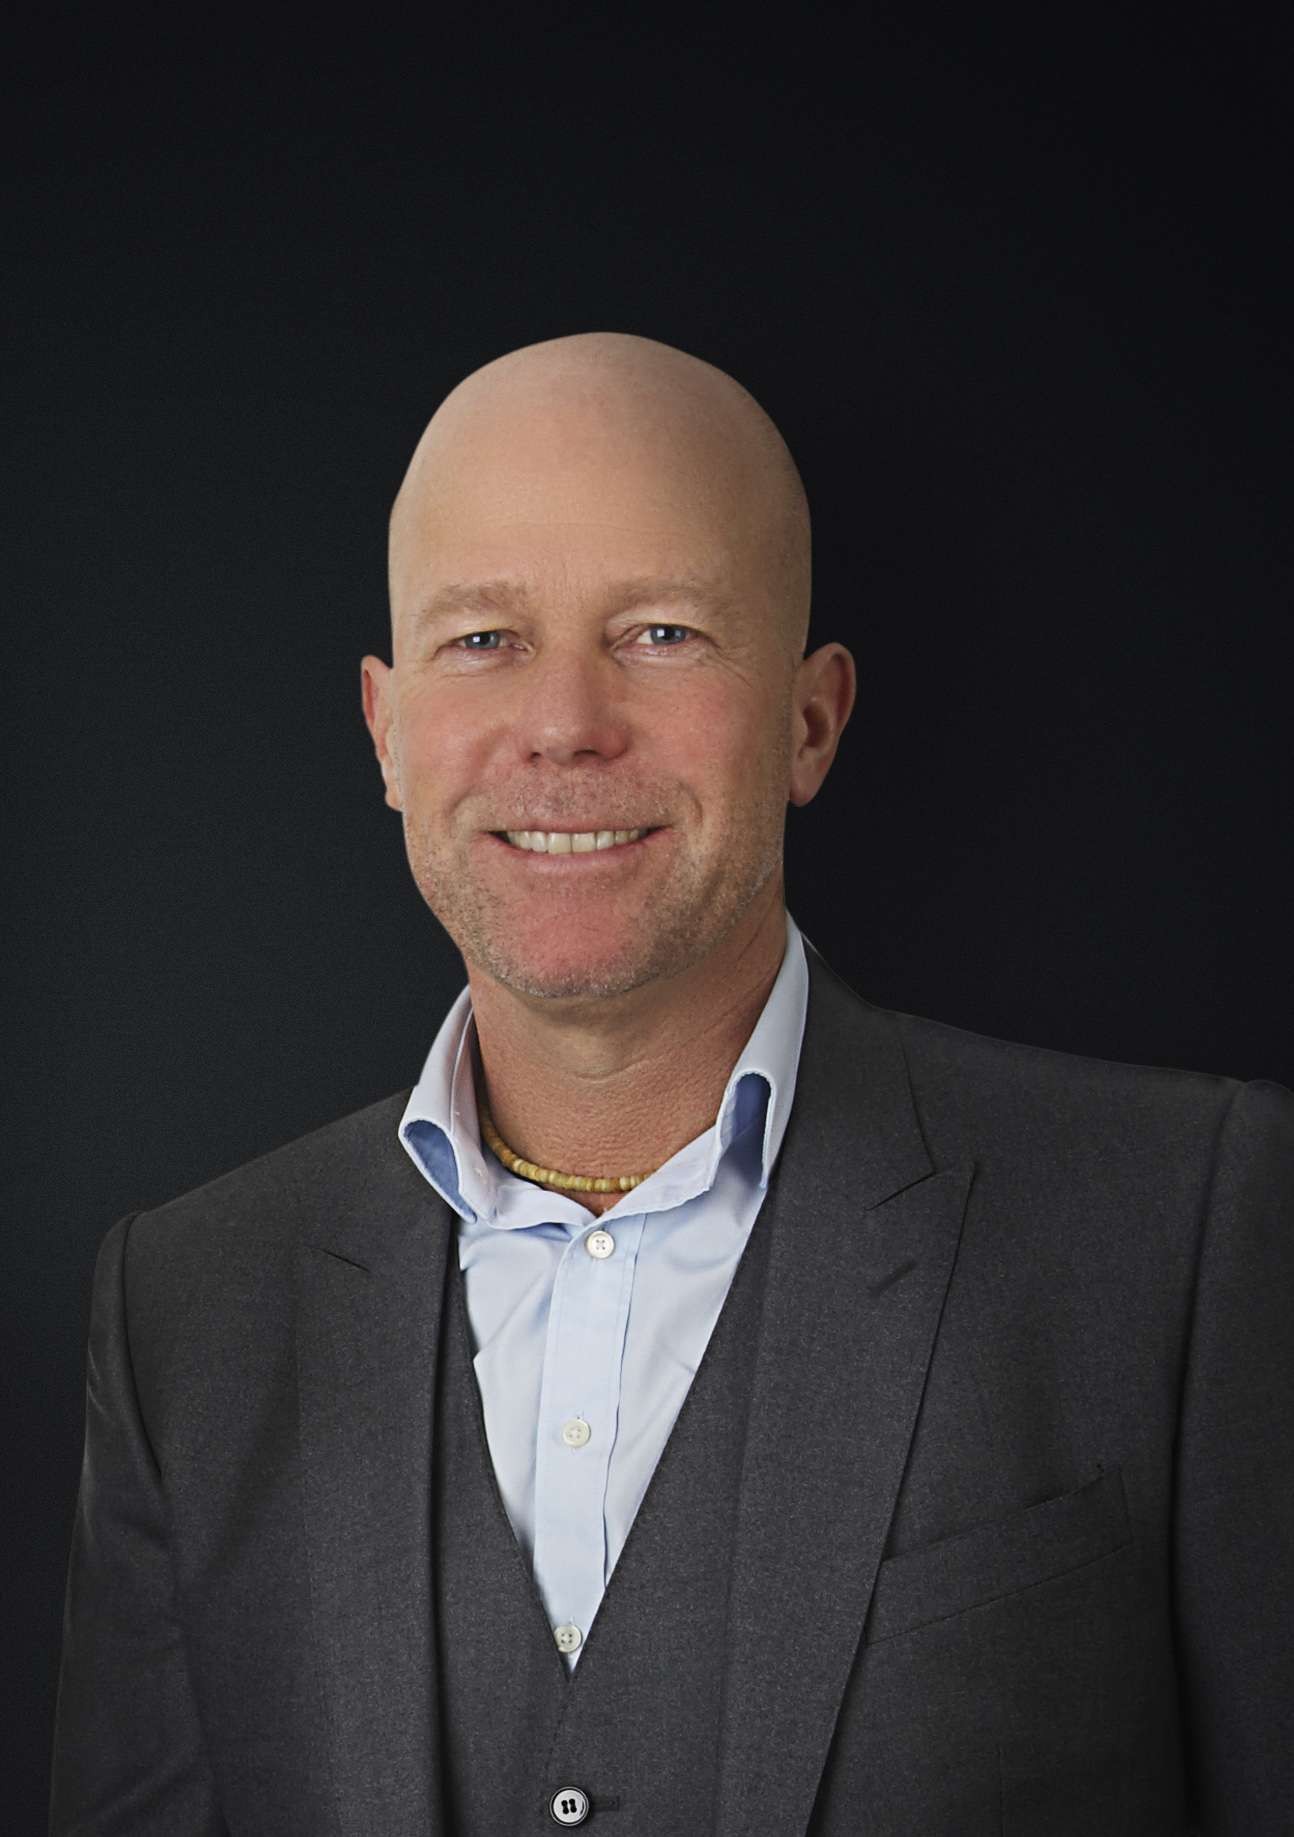 Peter Wahsner, CEO